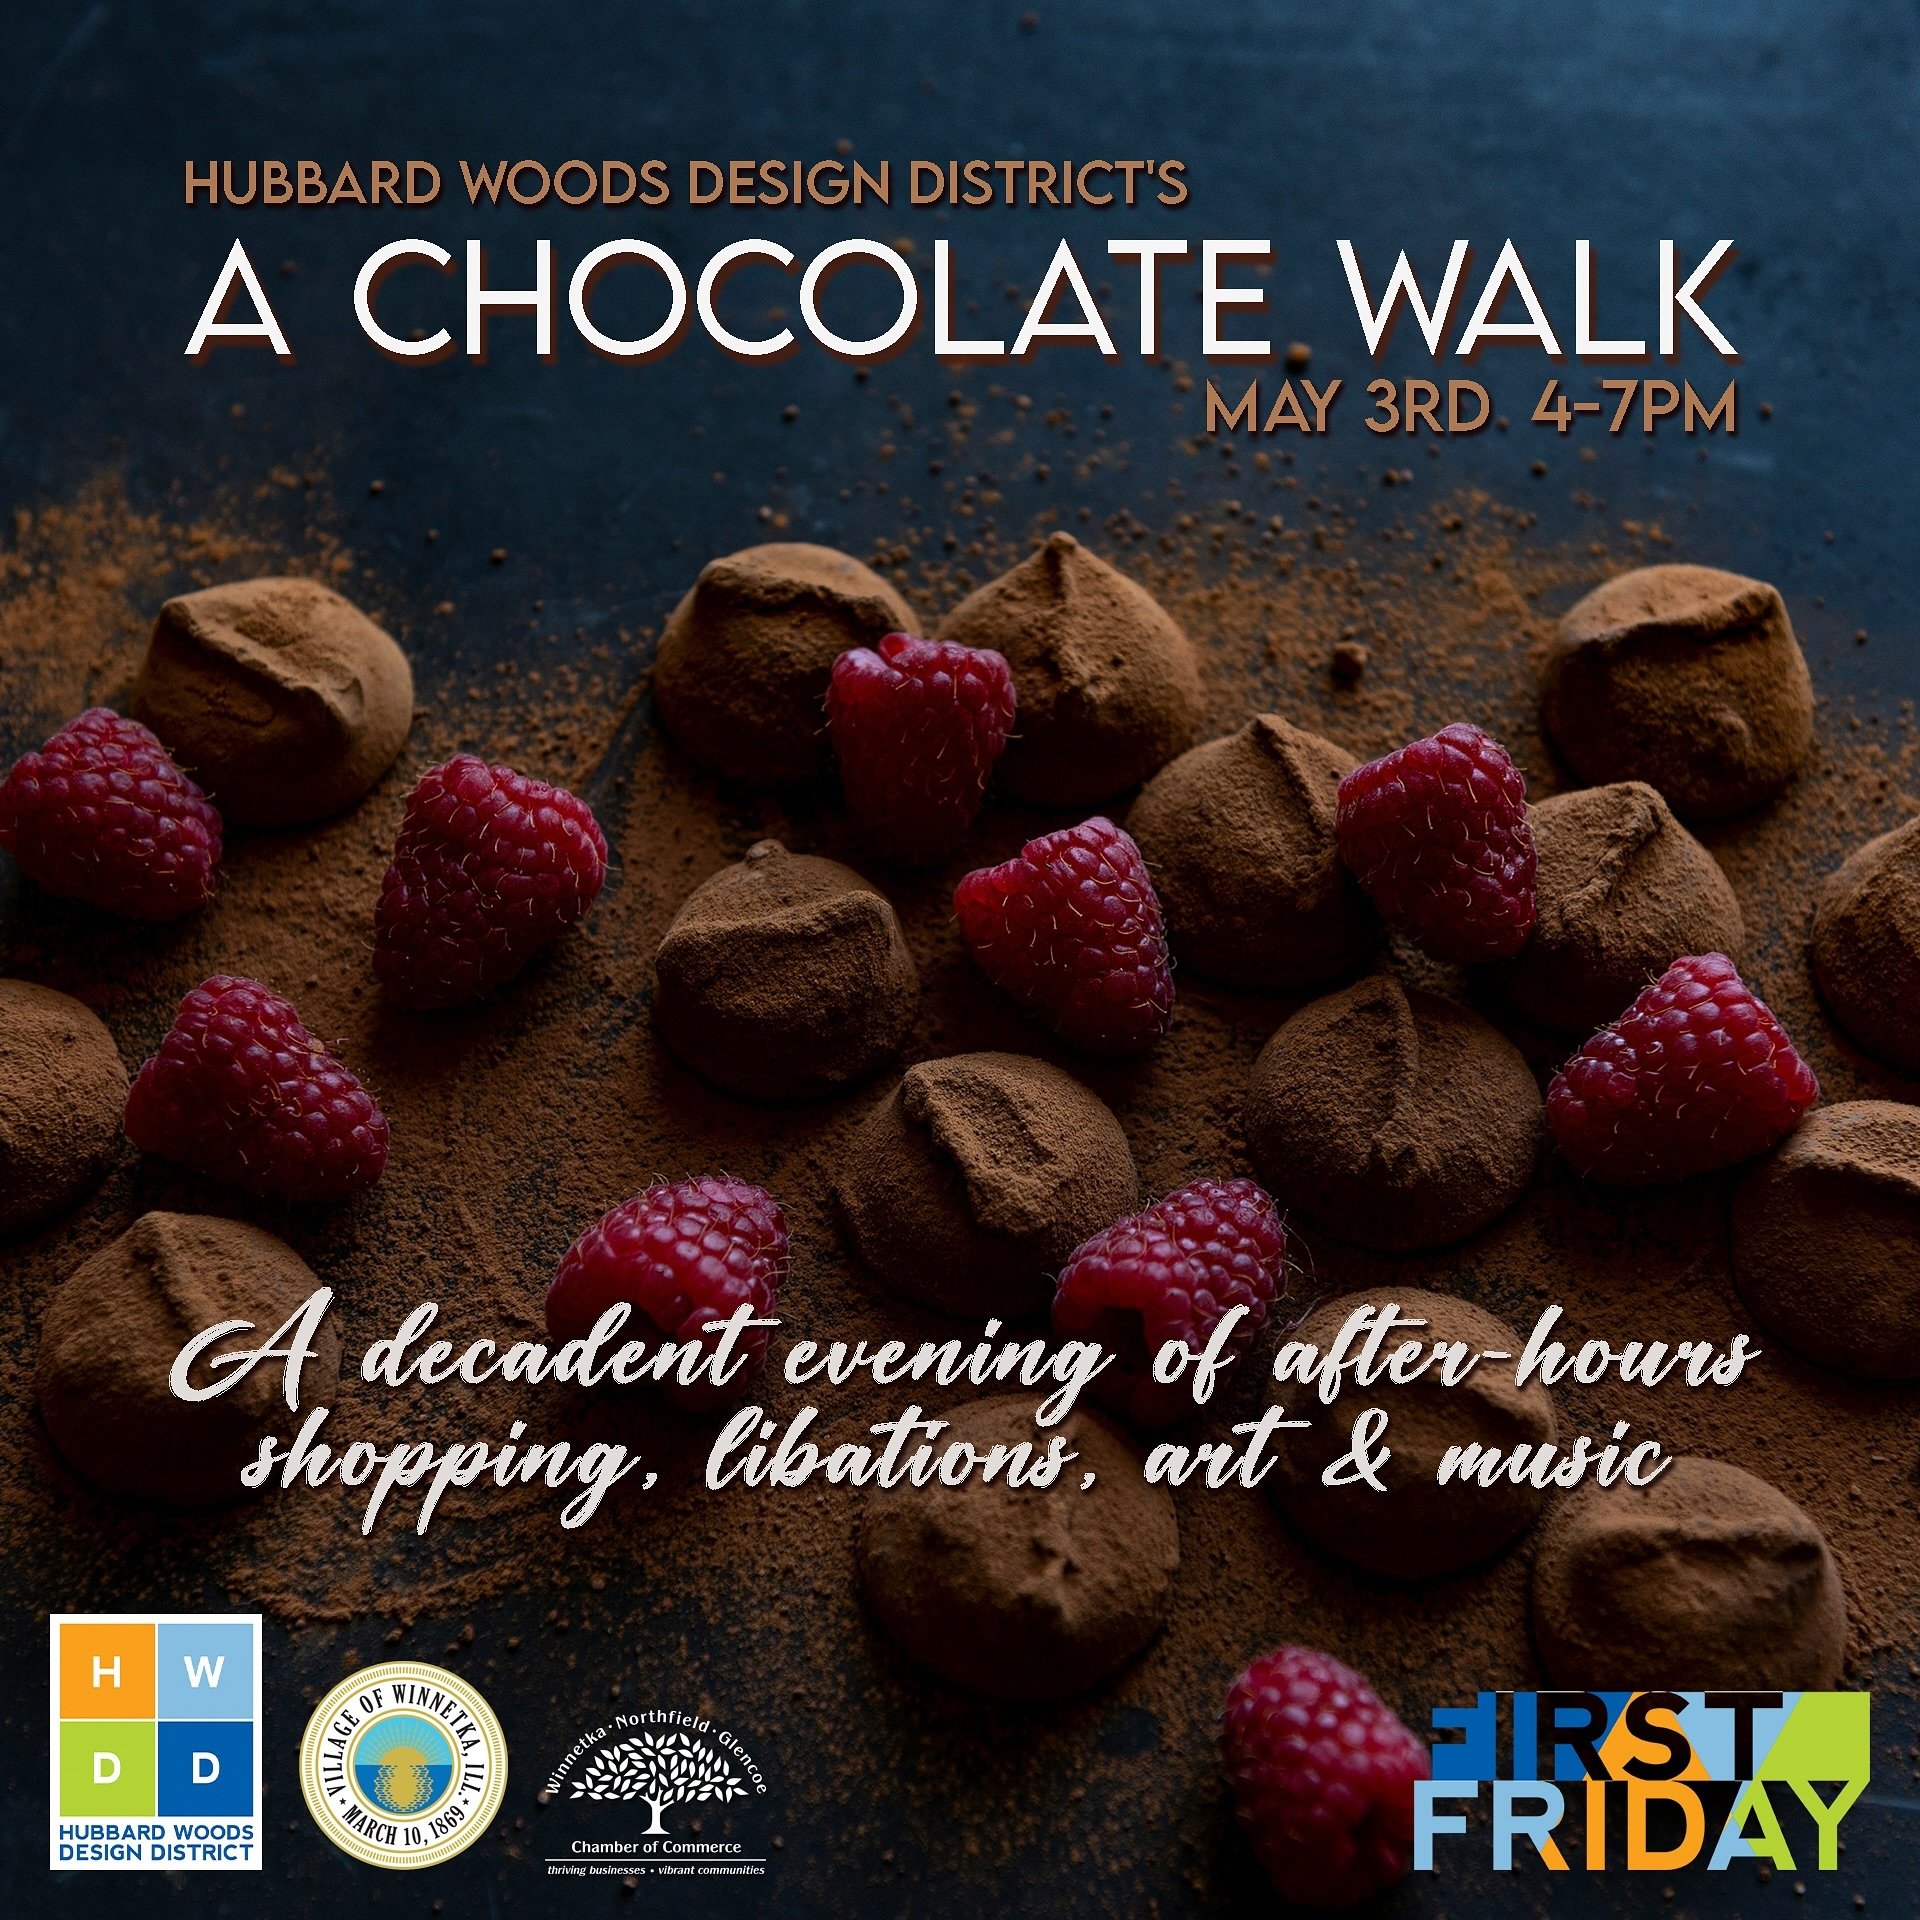 First Friday returns to Hubbard Woods Design District on May 3rd from 4&ndash;7pm! Join us for A Chocolate Walk&mdash;an evening of after-hours shopping, libations (including deliciously decadent chocolates!) art &amp; music.

📍 Green Bay Road (Towe